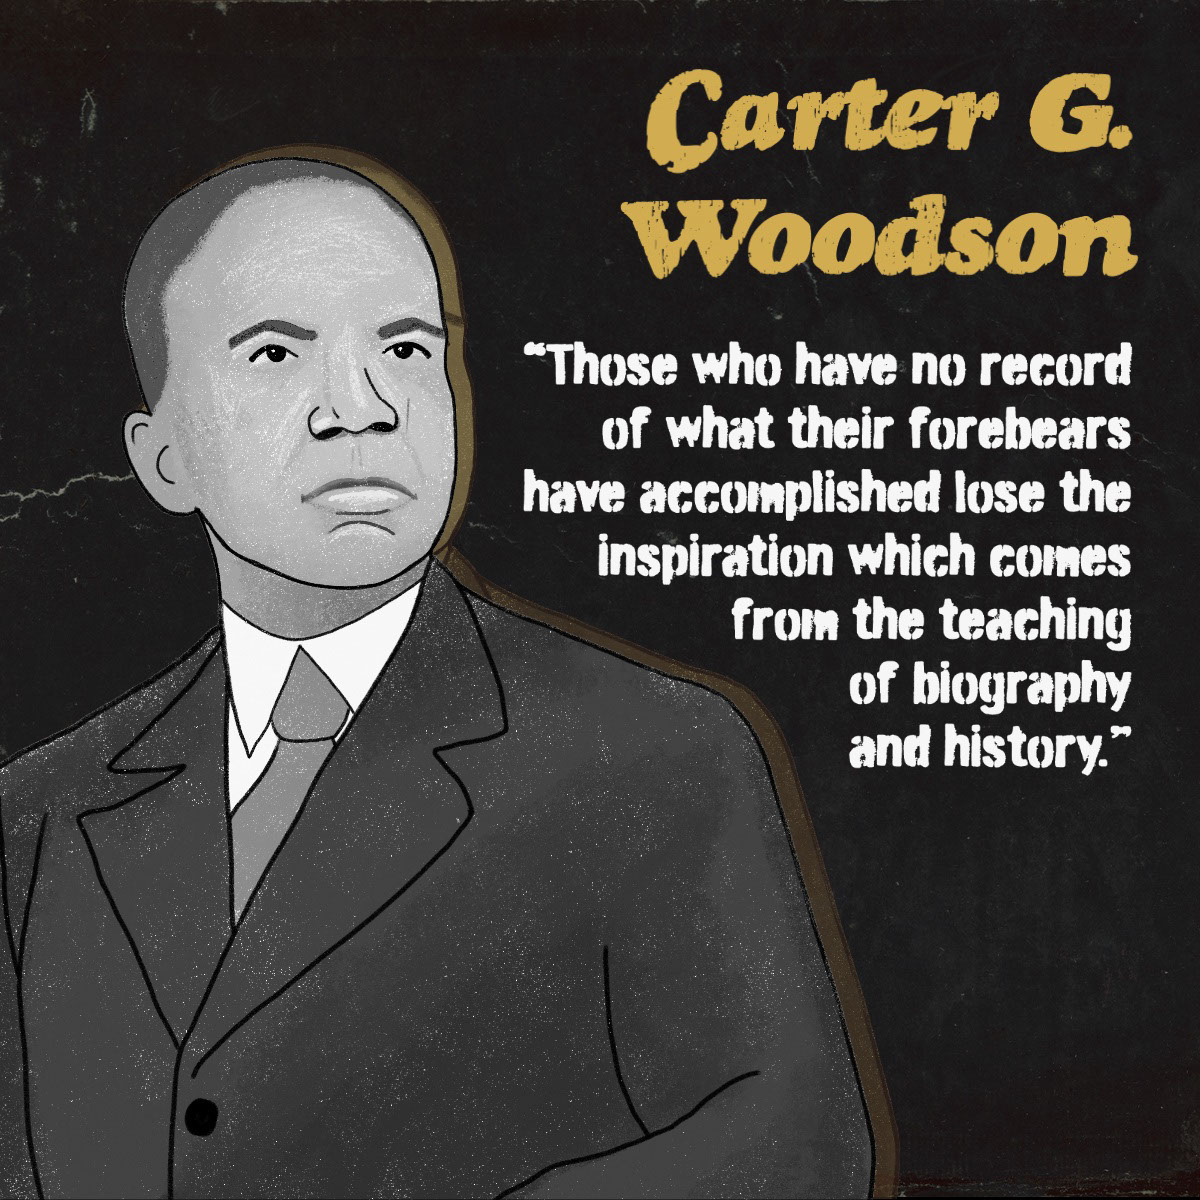 Black & Yellow Grunge Historical Figure Quote Instagram Sqaure Carter G. Woodson “Those who have no record of what their forebears have accomplished lose the inspiration which comes from the teaching of biography and history.”